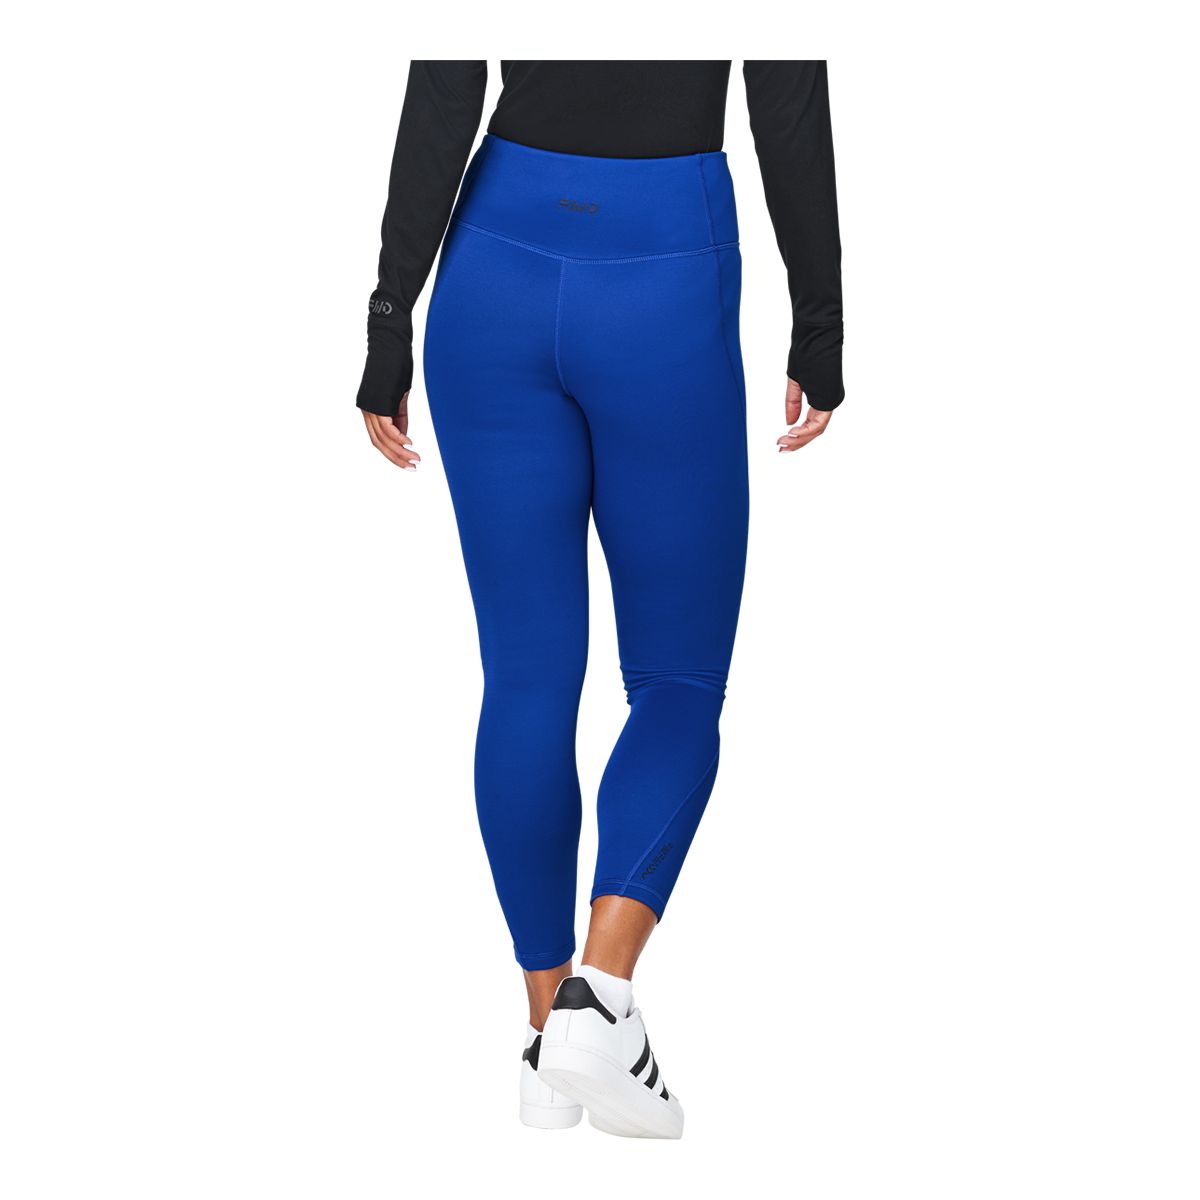 Crash Tights 2.0 - Solid: Thumbnail Image 1  Winter leggings, Fall winter  outfits, Winter outfits